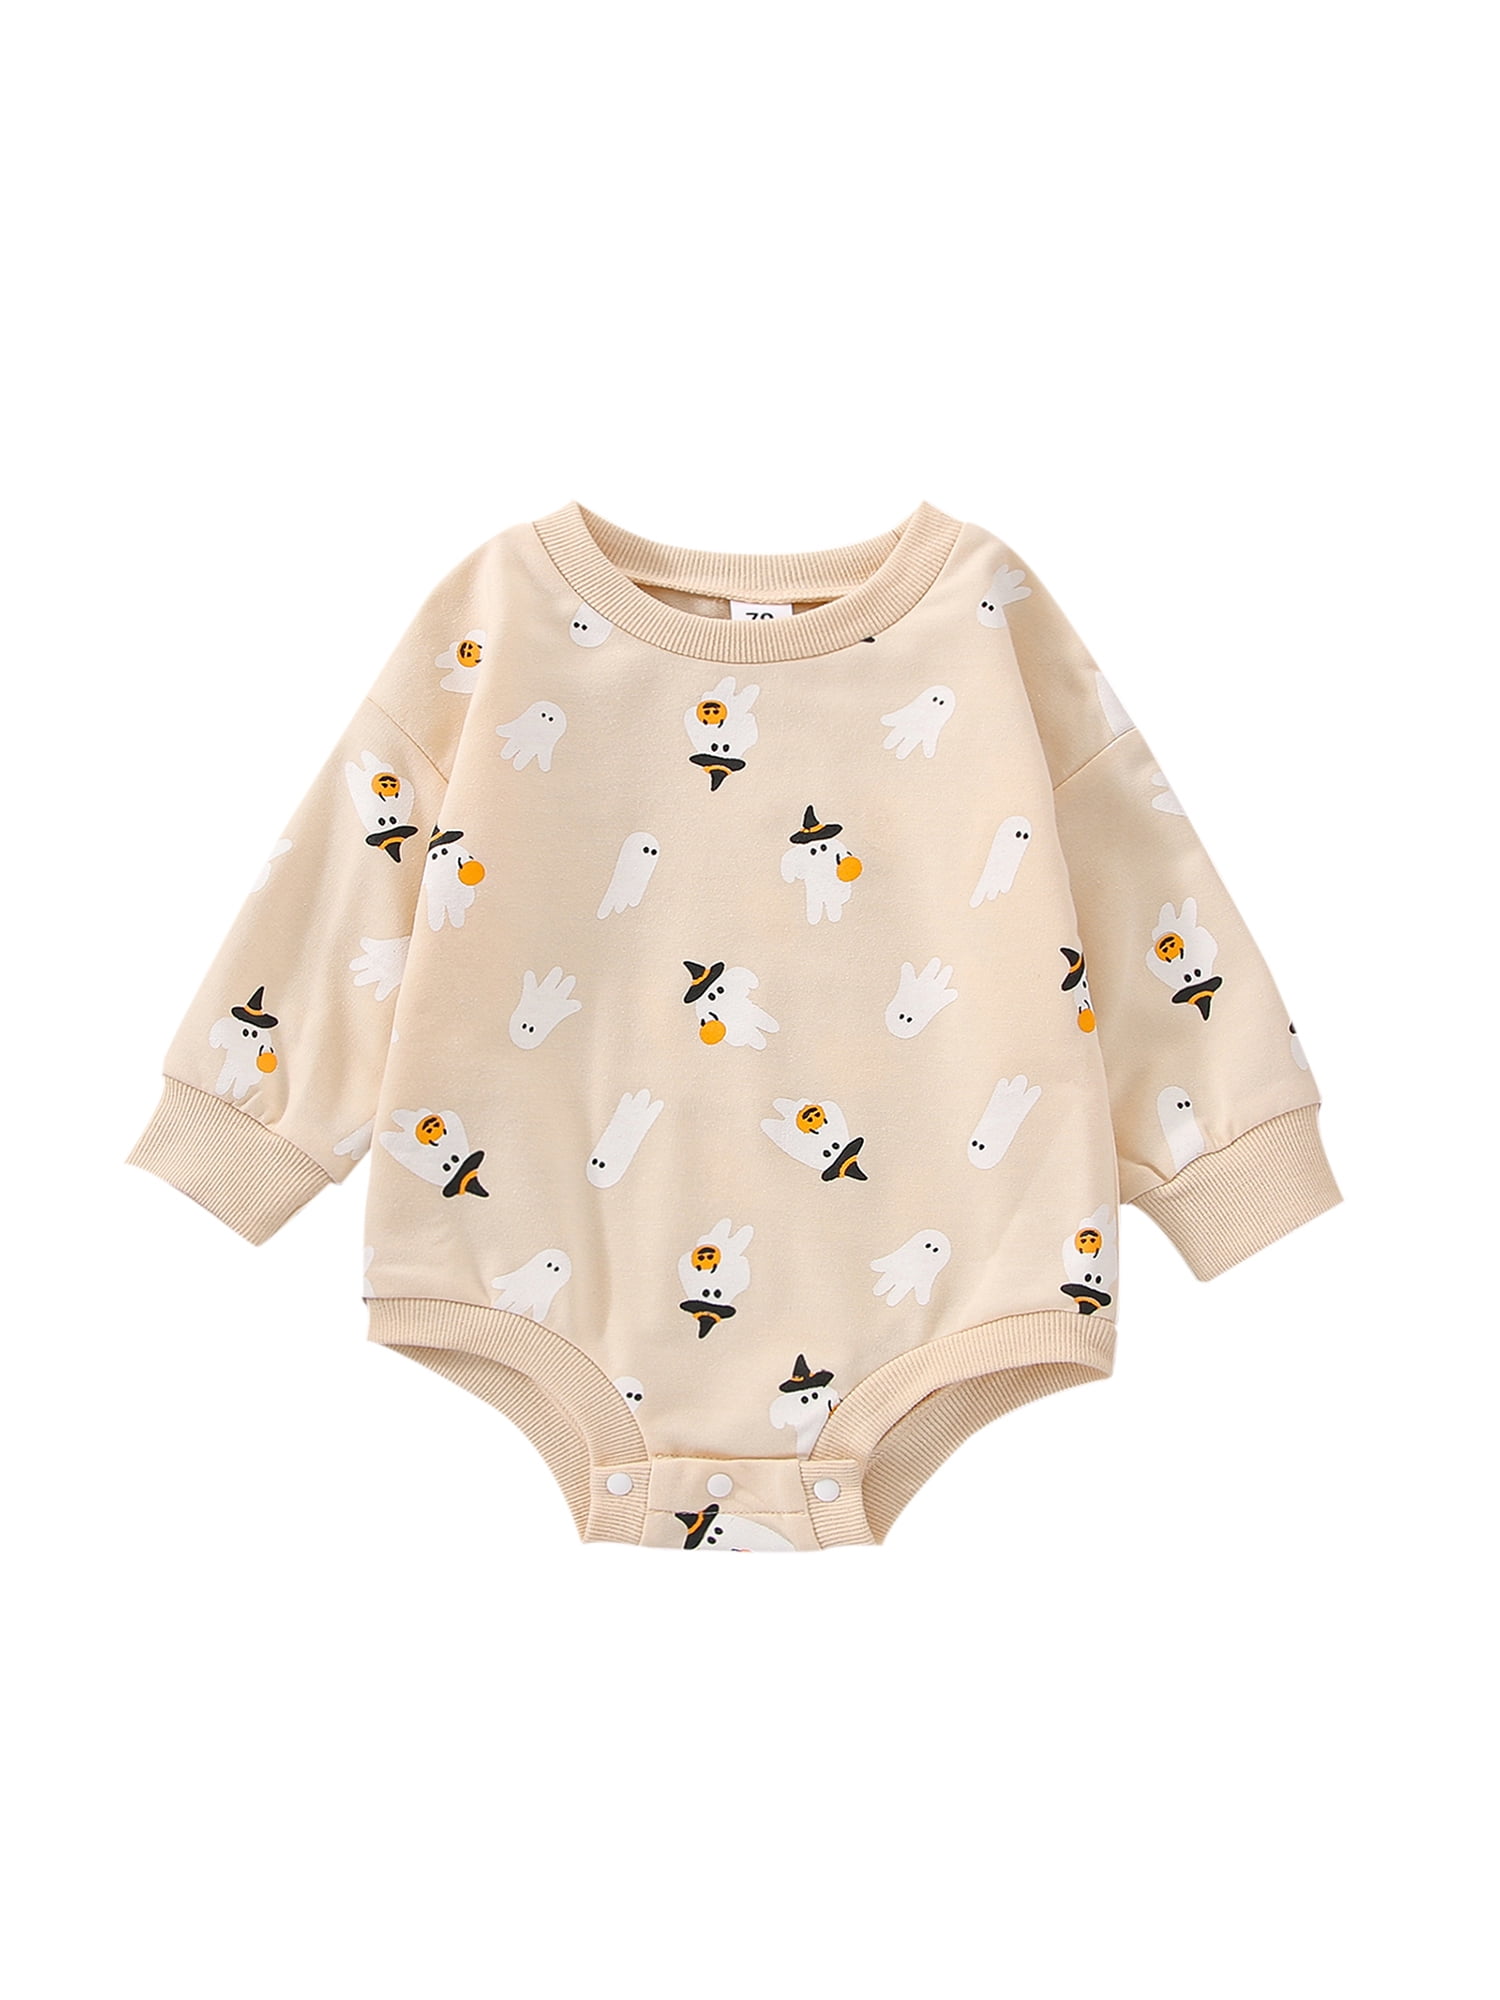 Angou Rompers Autumn Long Sleeve Angel Wings Baby Girls Boys Clothes 1-3Yrs  Fashion Baby Girls Boys Cute One Piece Baby Bodysuit